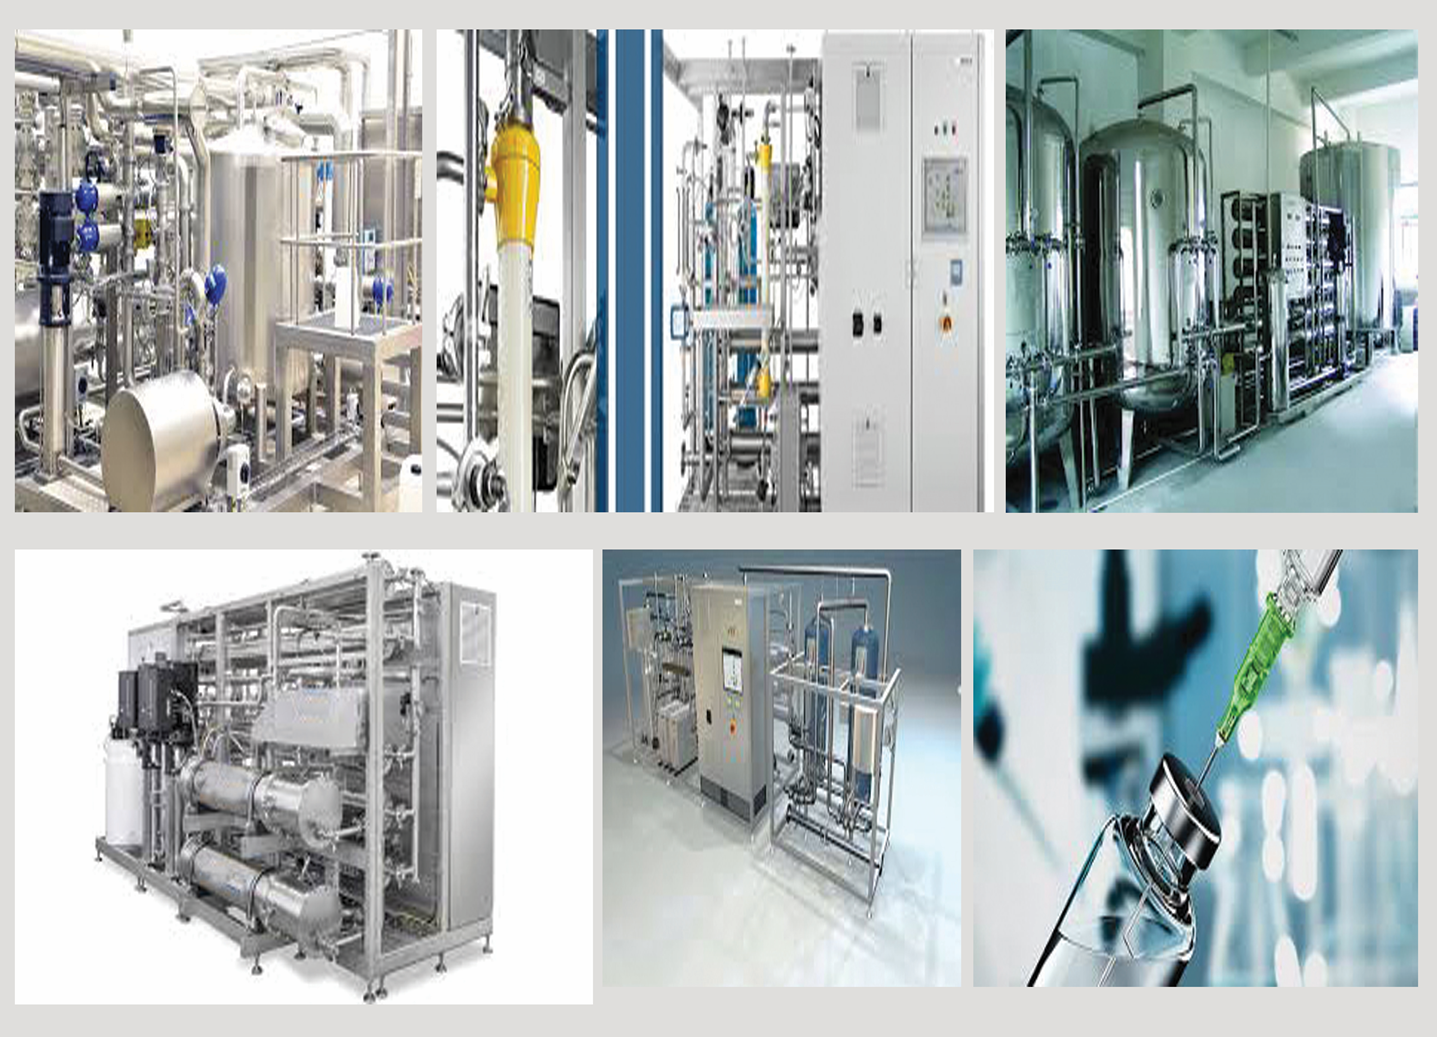 High Purity Water Systems